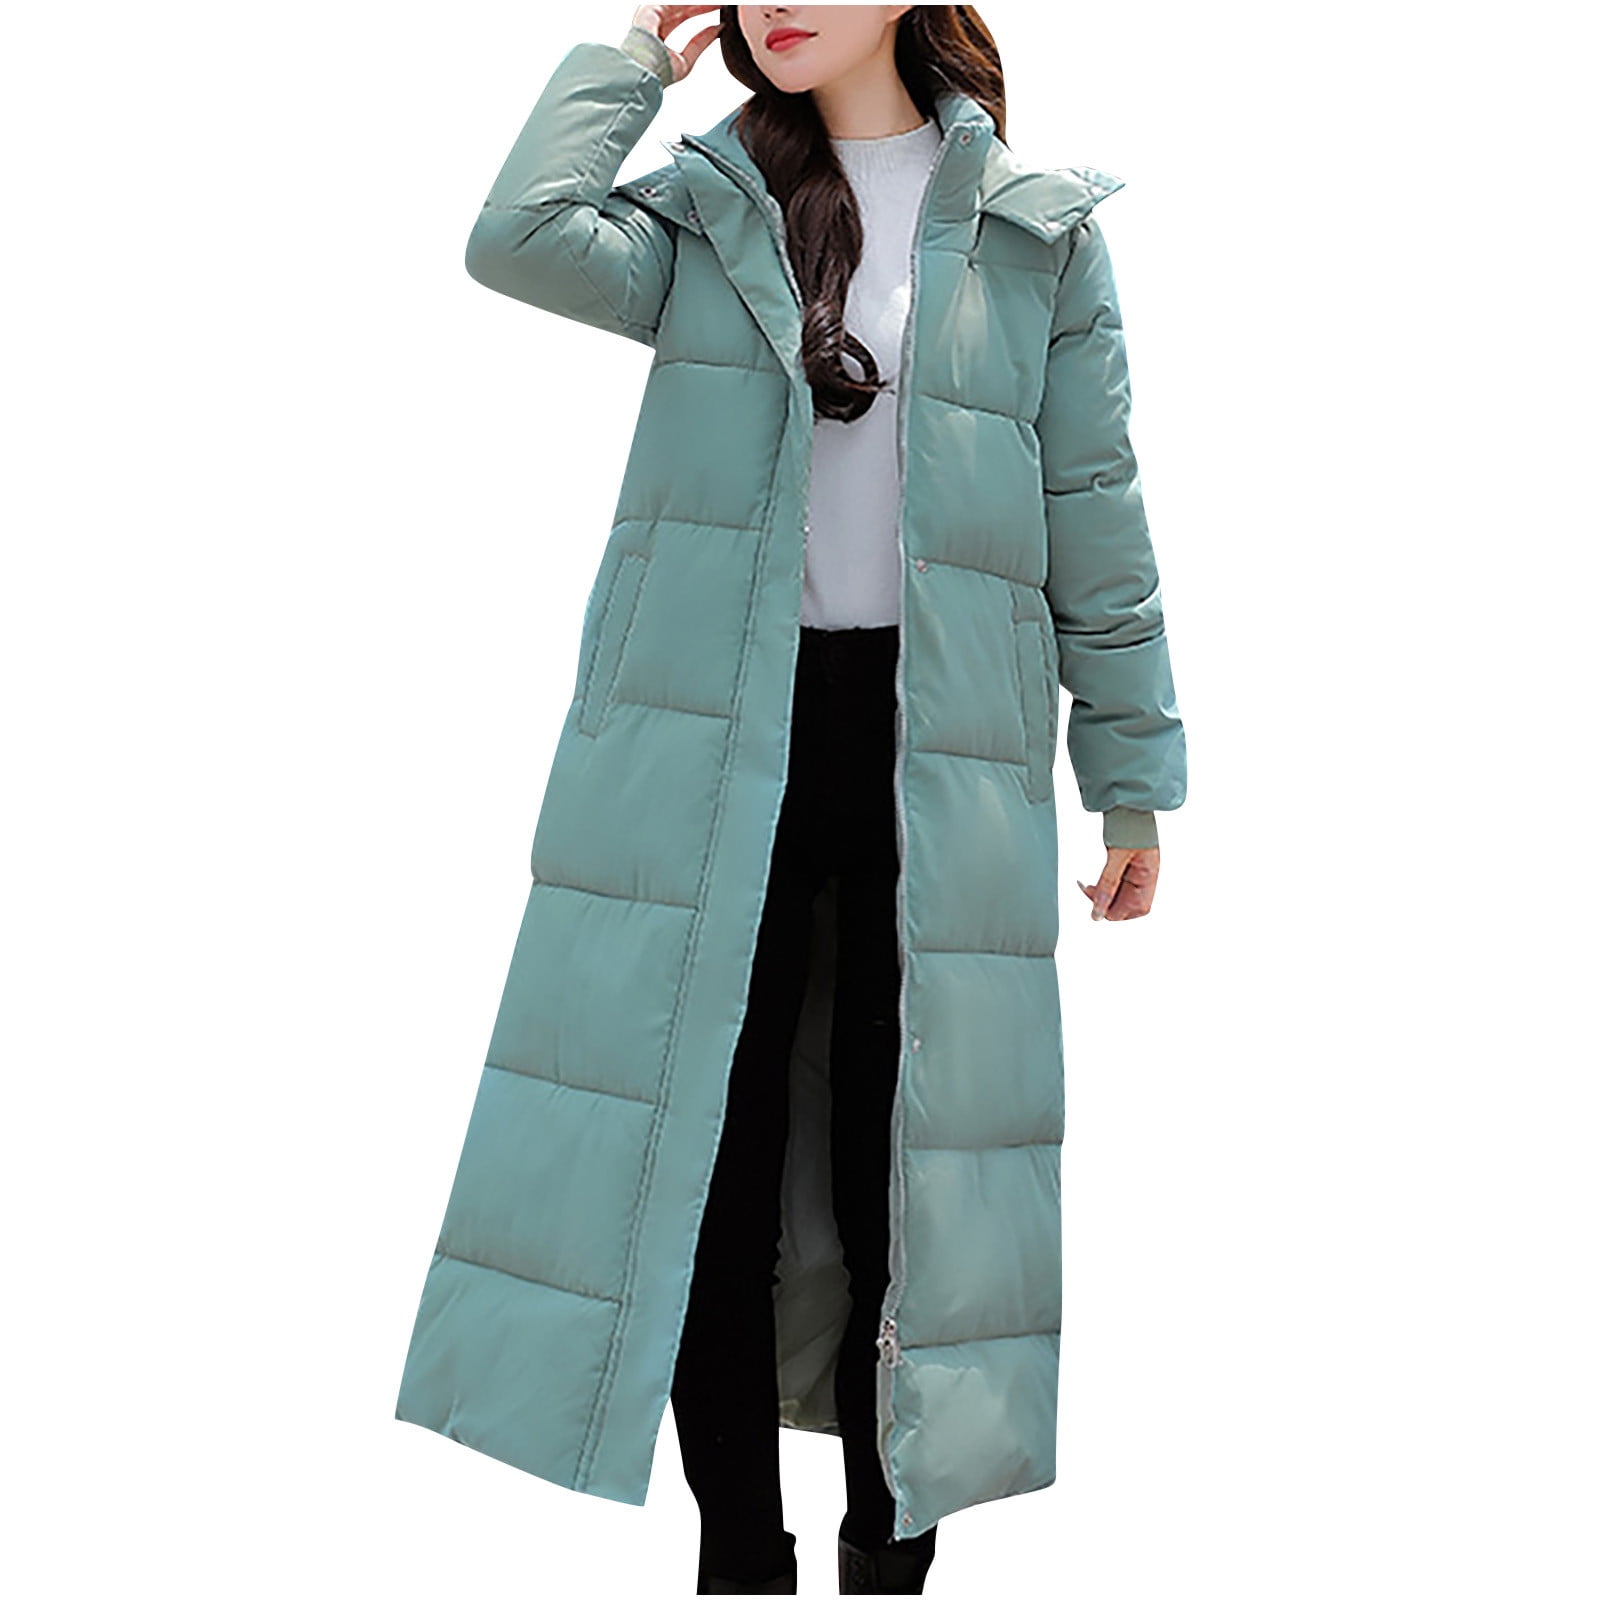 Flywake plus size winter coats for women Winter Personal Woman Lengthened  And Thickened Medium Length Down Cotton Jacket shacket jacket for Fall,  Winter 